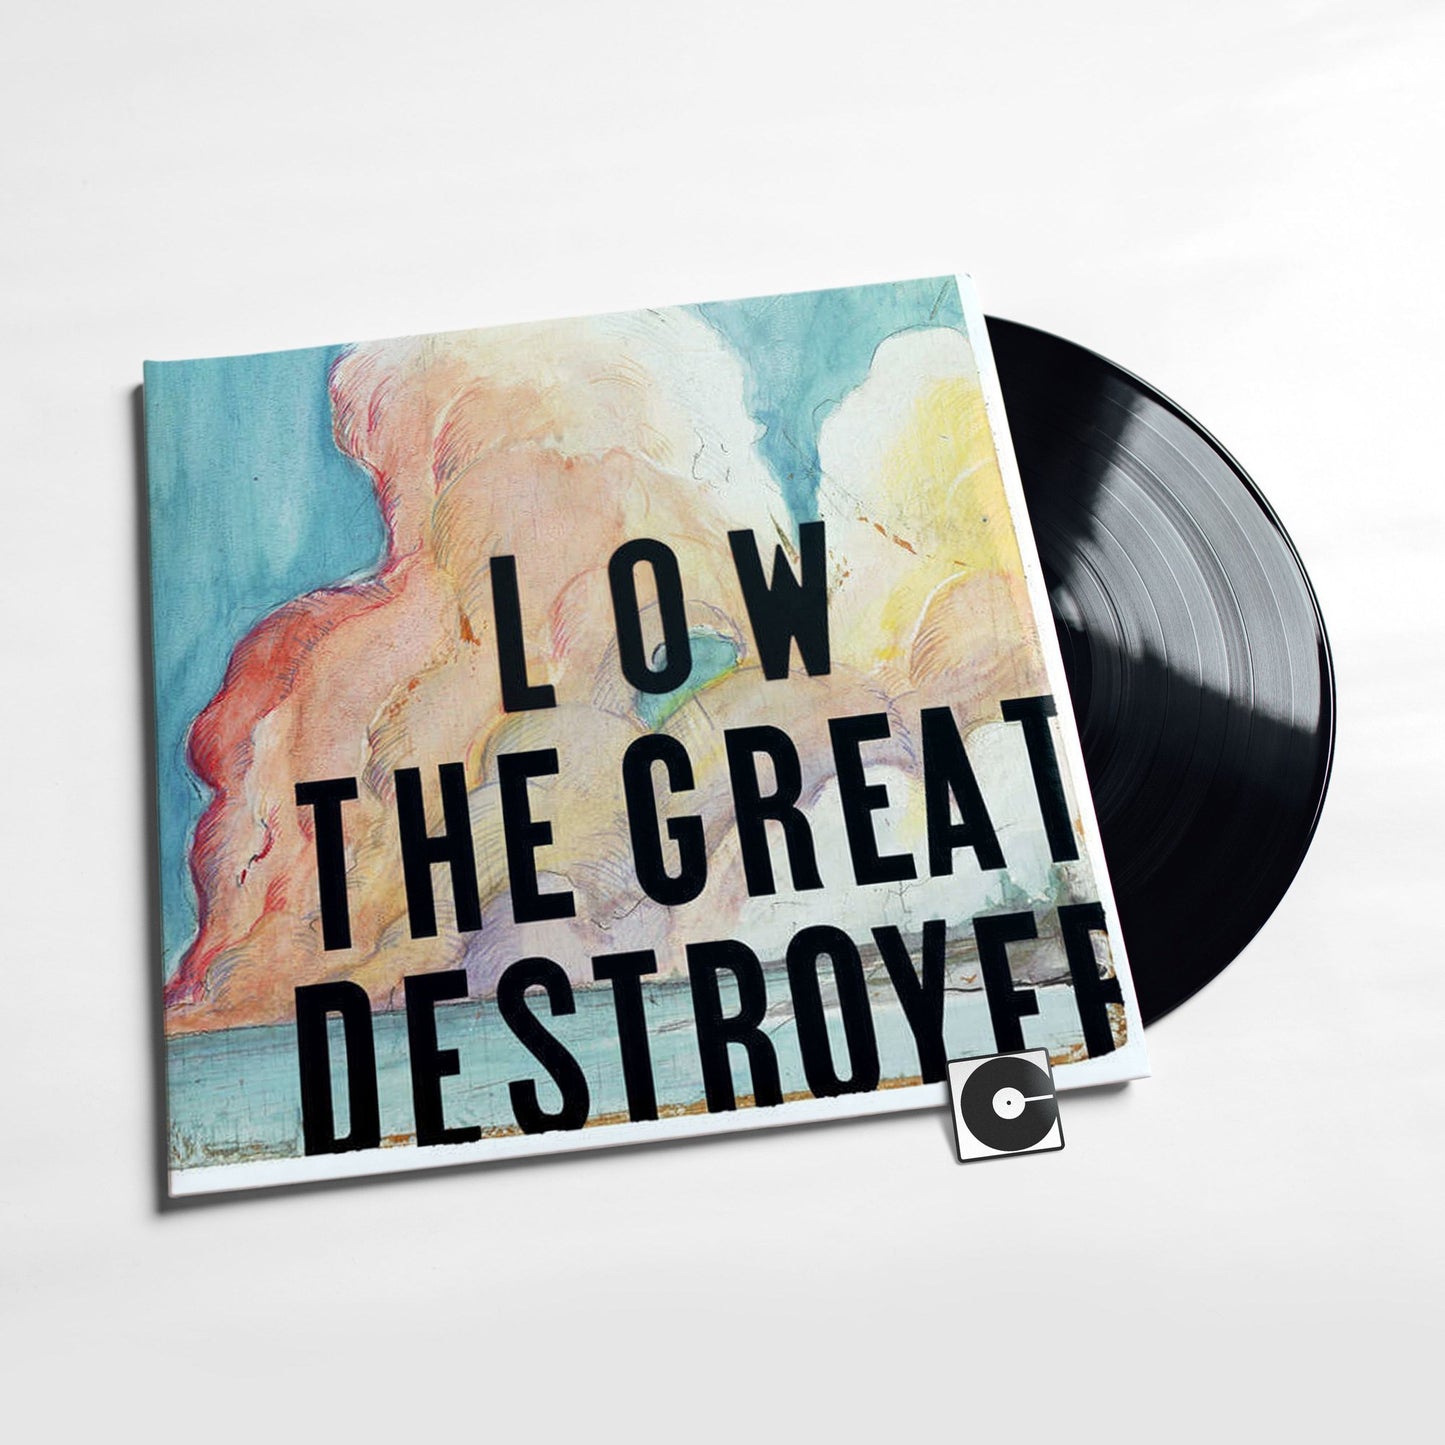 Low - "The Great Destroyer"